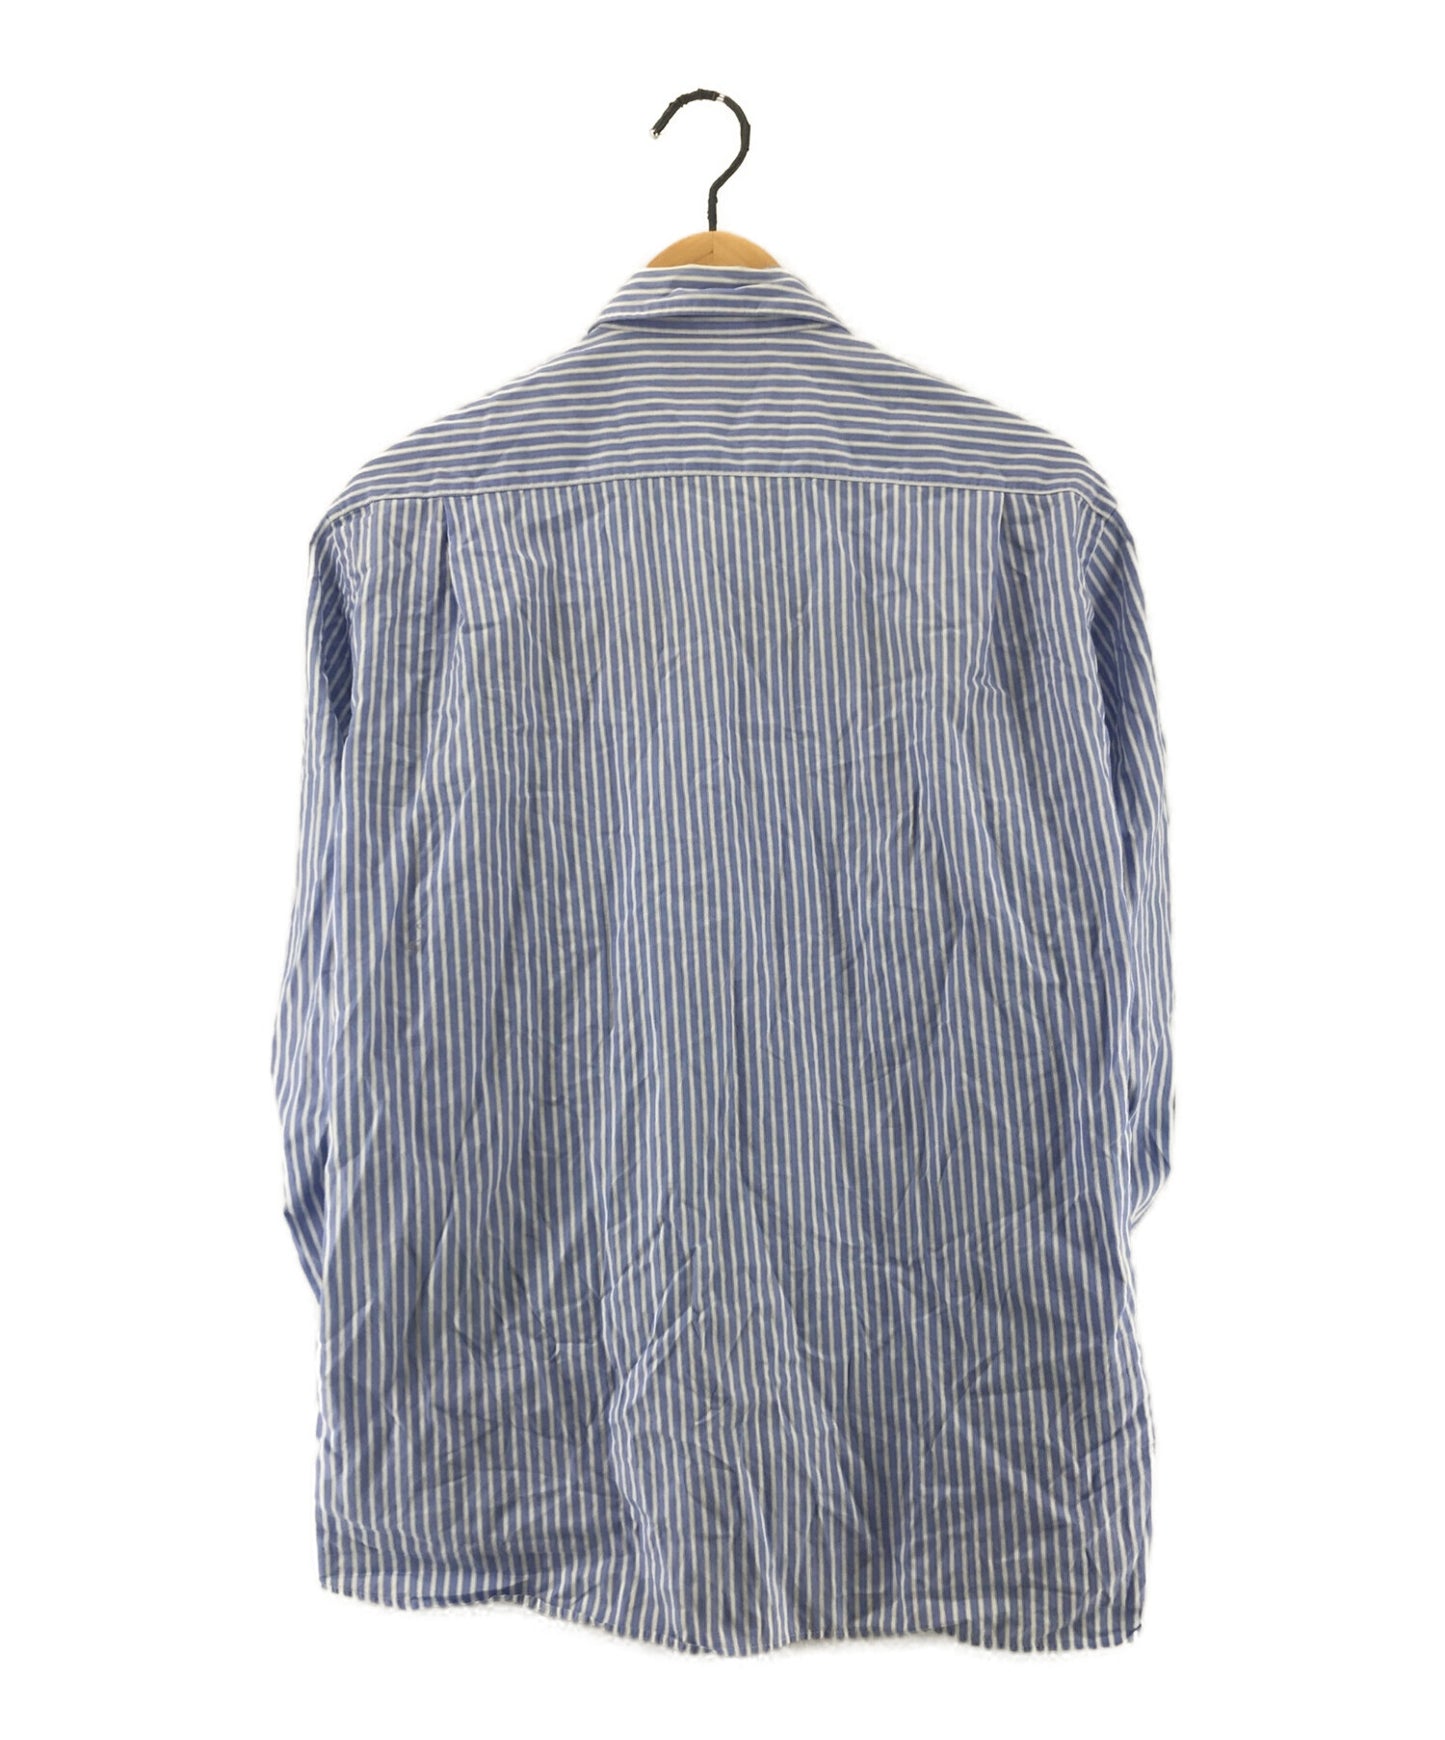 [Pre-owned] COMME des GARCONS HOMME Wool Switching Packing Stripe Shirt HH-B028